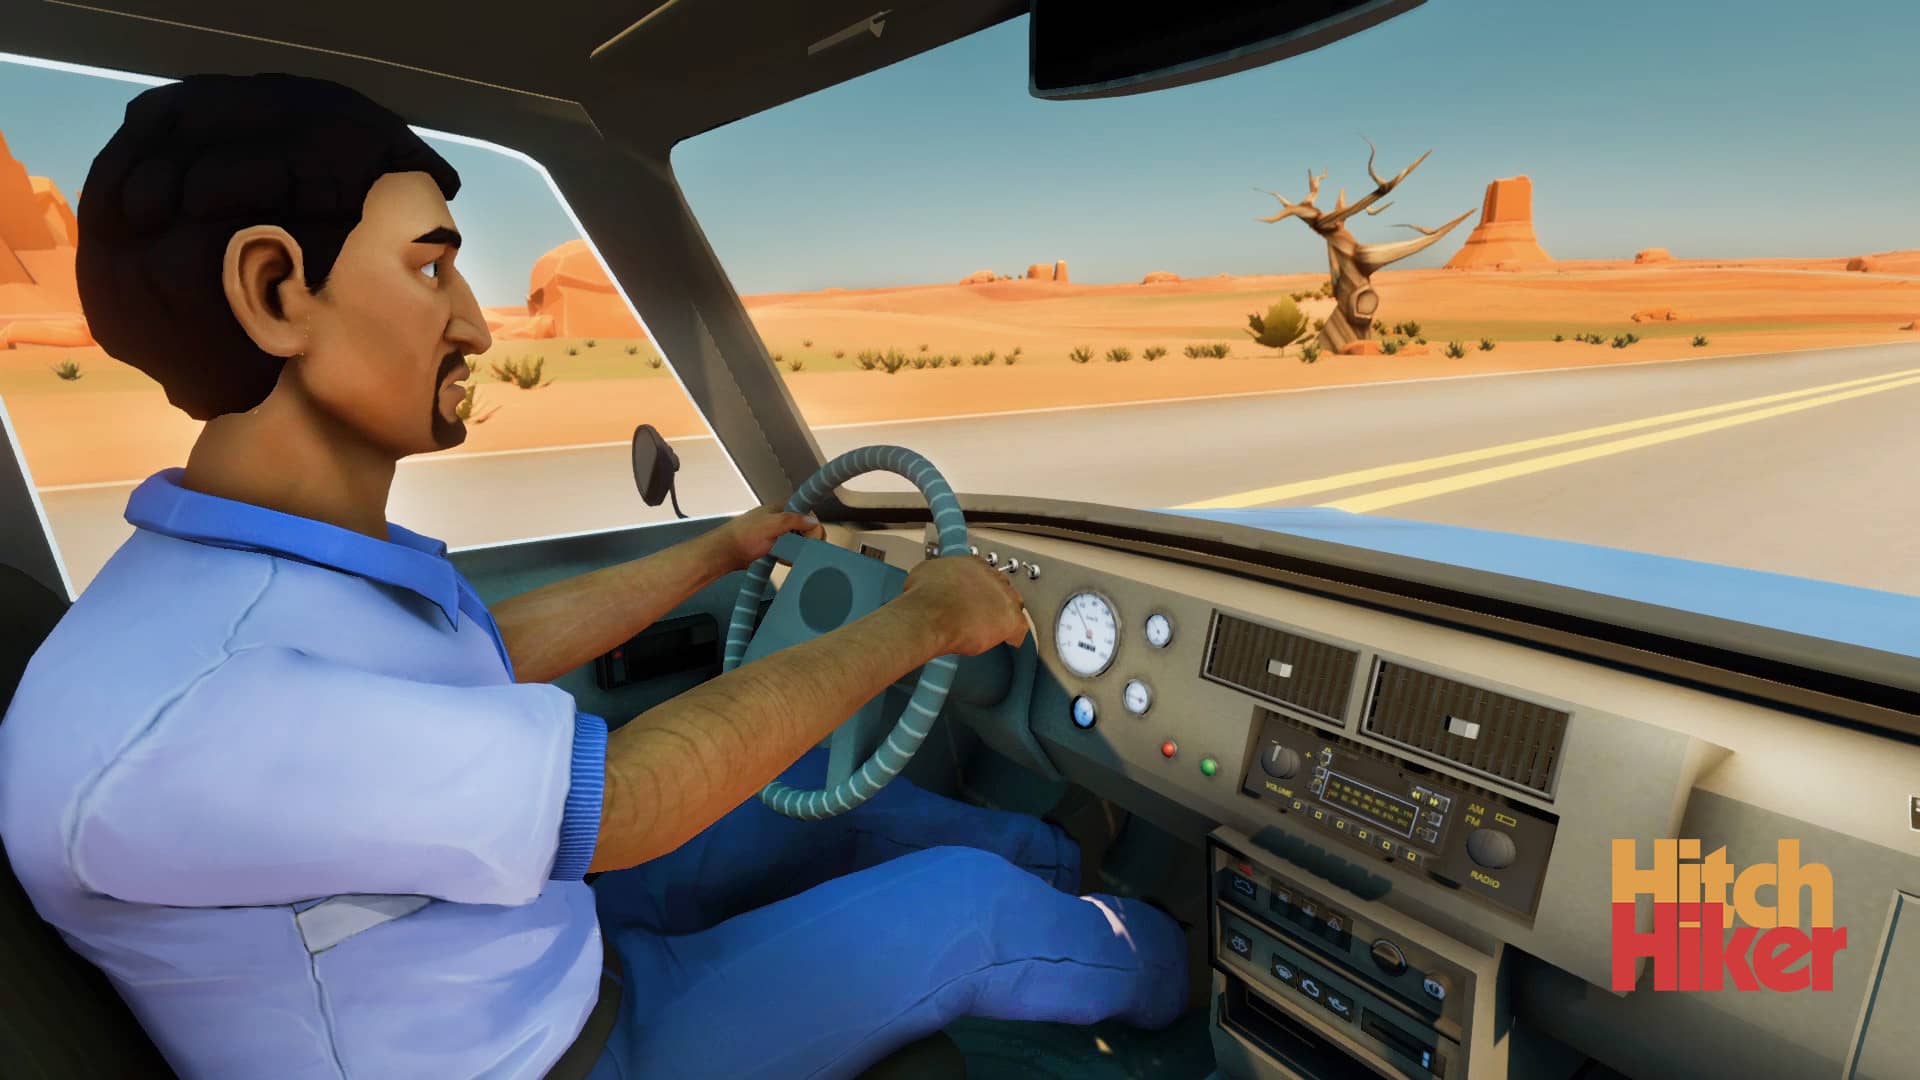 Hitchhiker Game Out this week